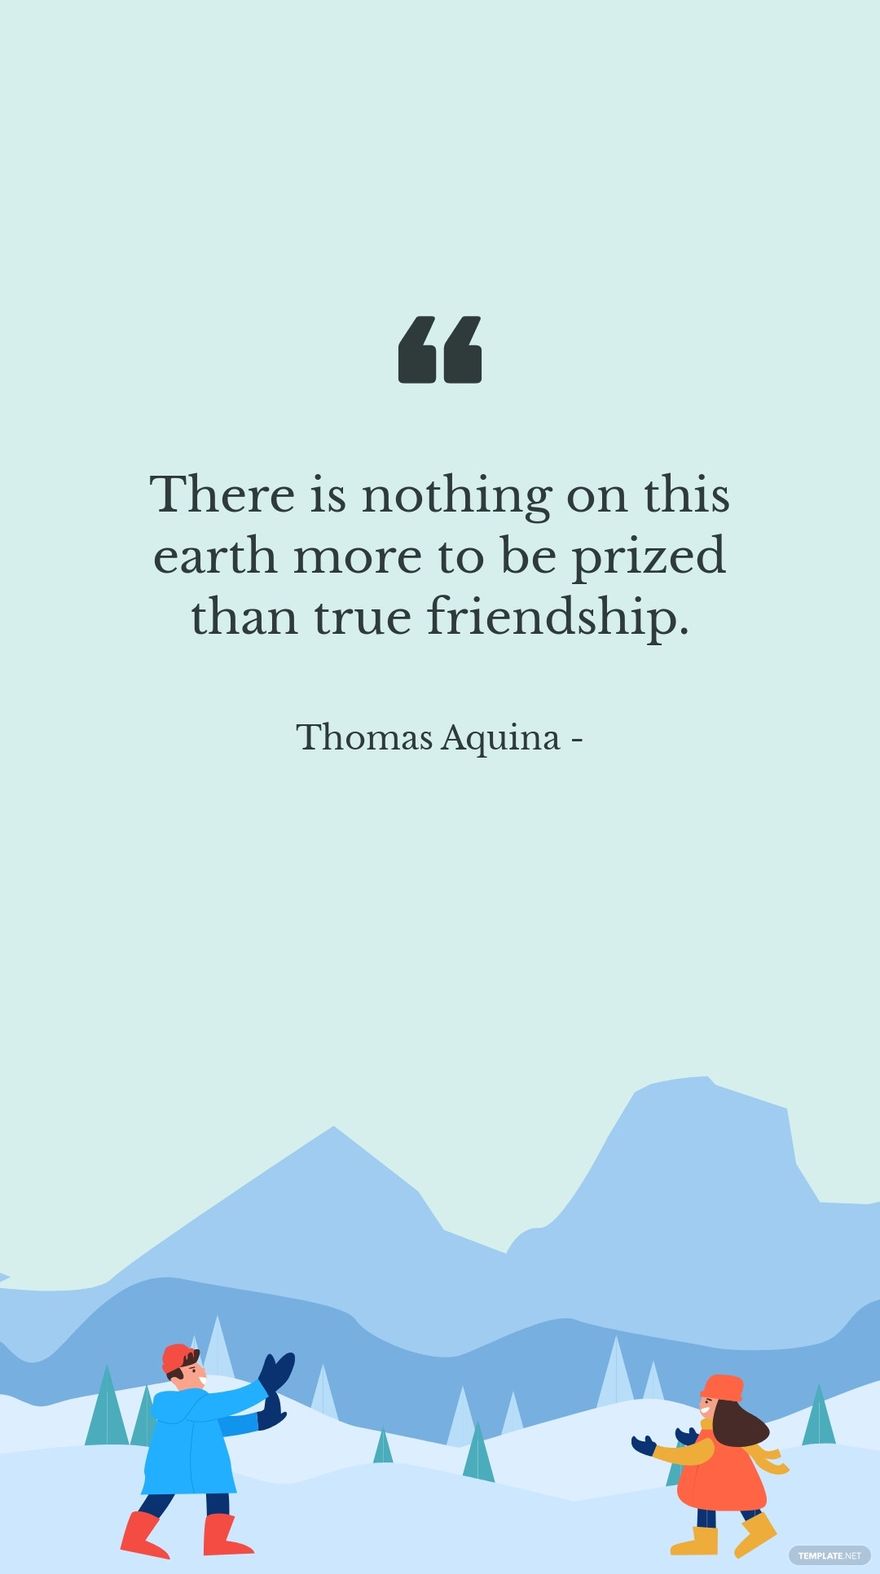 Thomas Aquina - There is nothing on this earth more to be prized than true friendship.